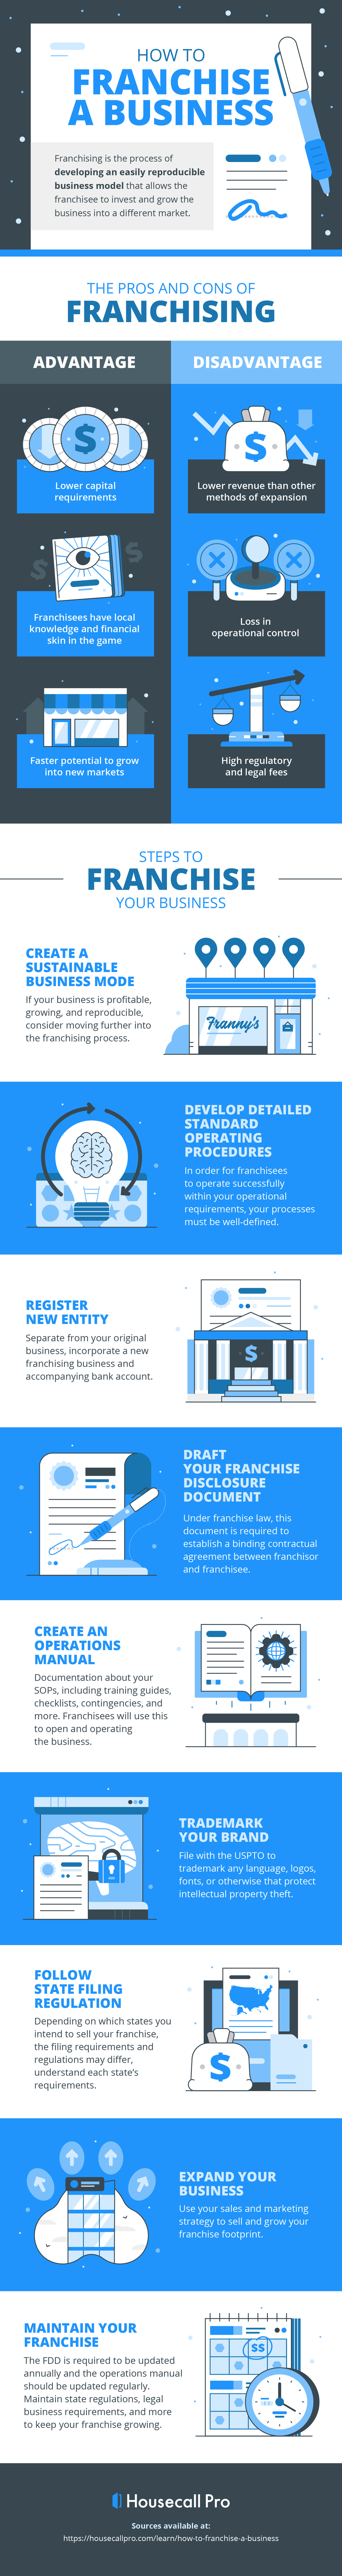 full infographic breaking down how to franchise a business